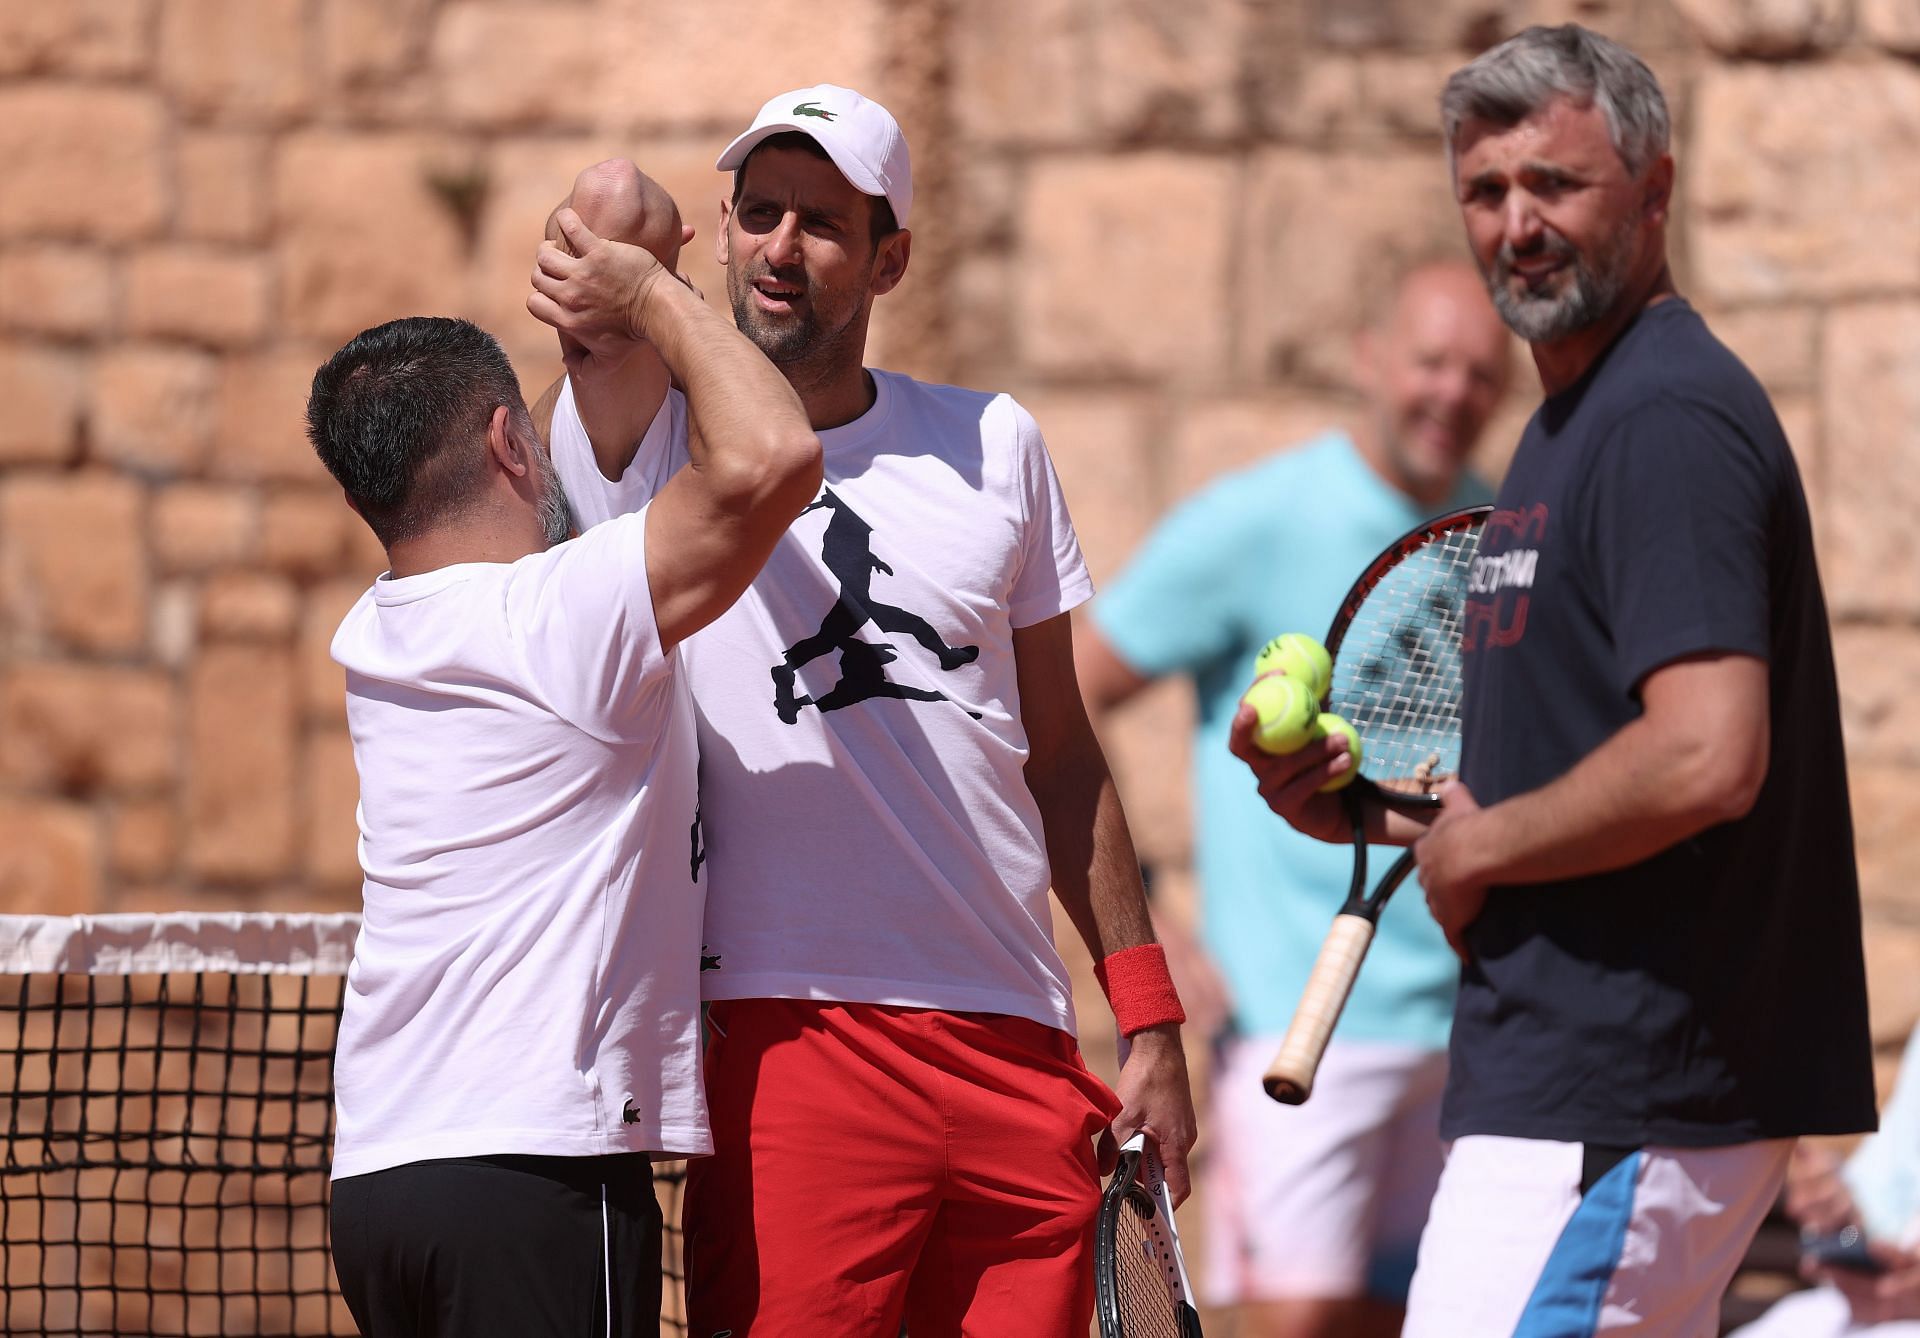 Novak Djokovic and Goran Ivanisevic (R) at the Rolex Monte-Carlo Masters - Day One.